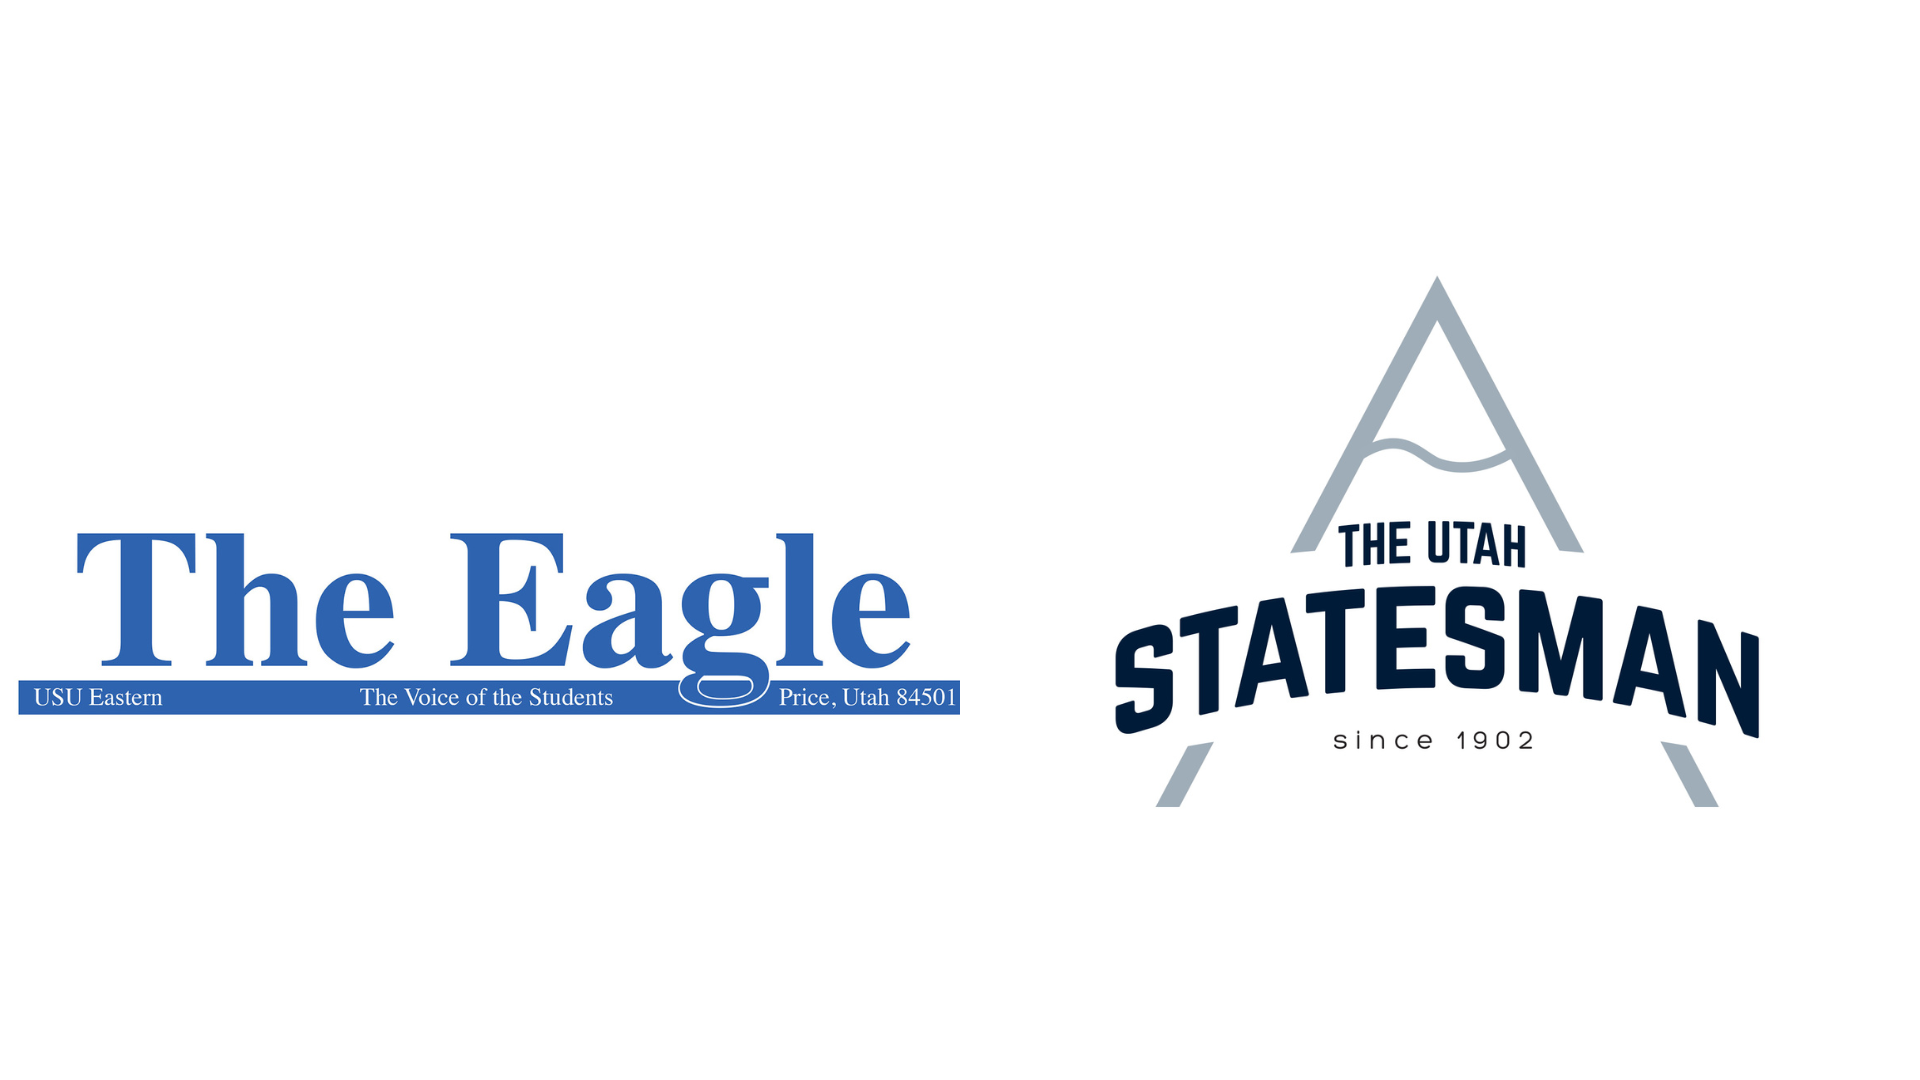 Left is a logo that says the eagle and the right is a logo that says the utah statesman with a mountian